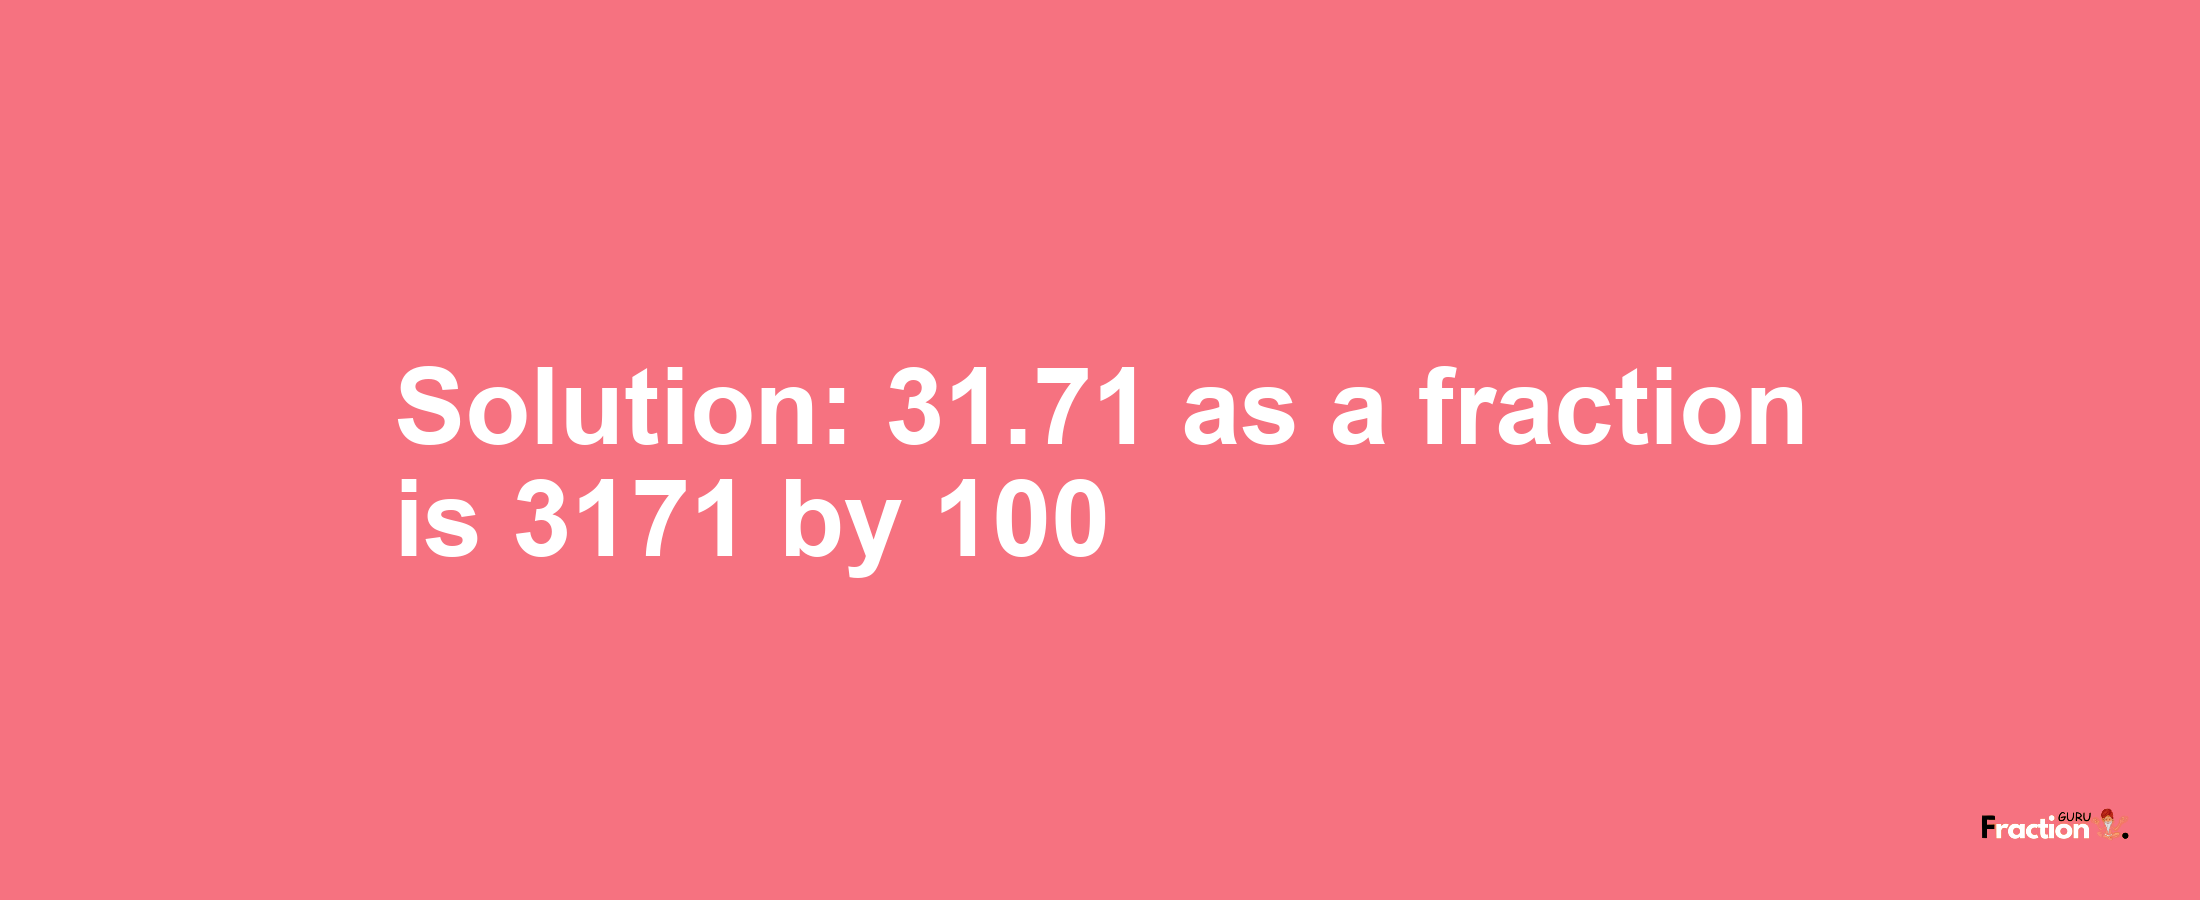 Solution:31.71 as a fraction is 3171/100